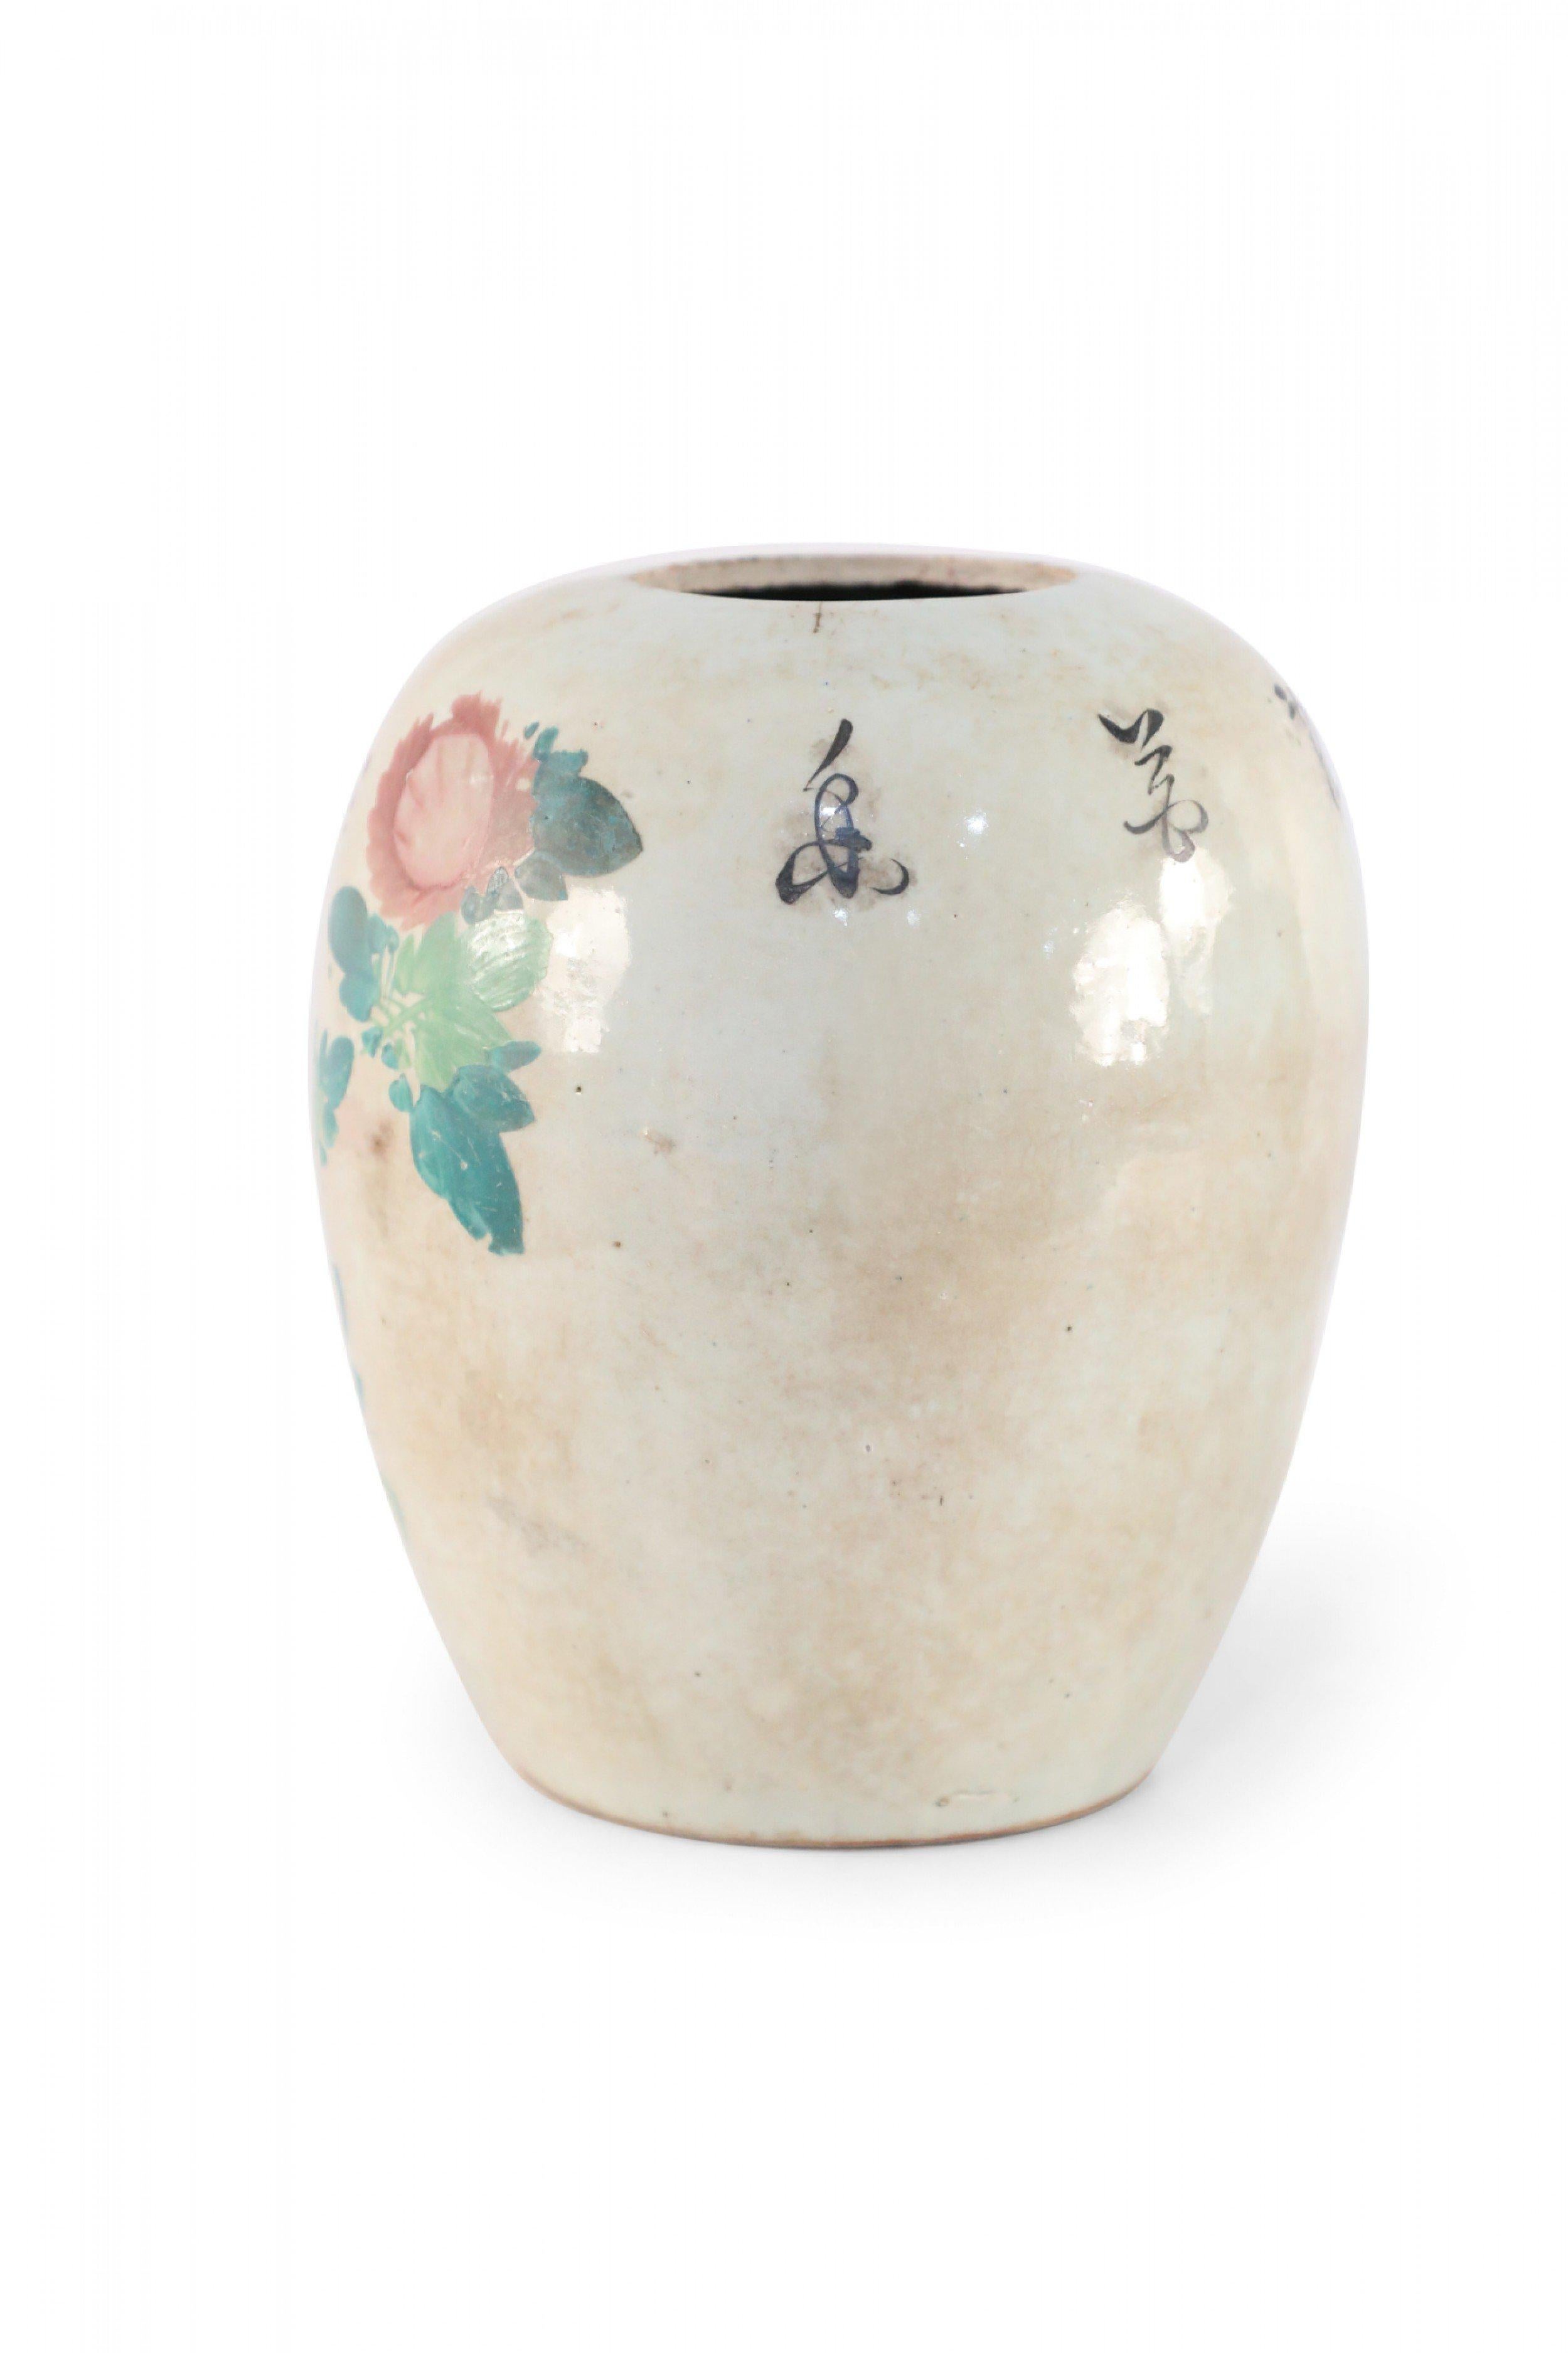 Chinese Beige and Green Botanical Motif Rounded Porcelain Vase For Sale 3